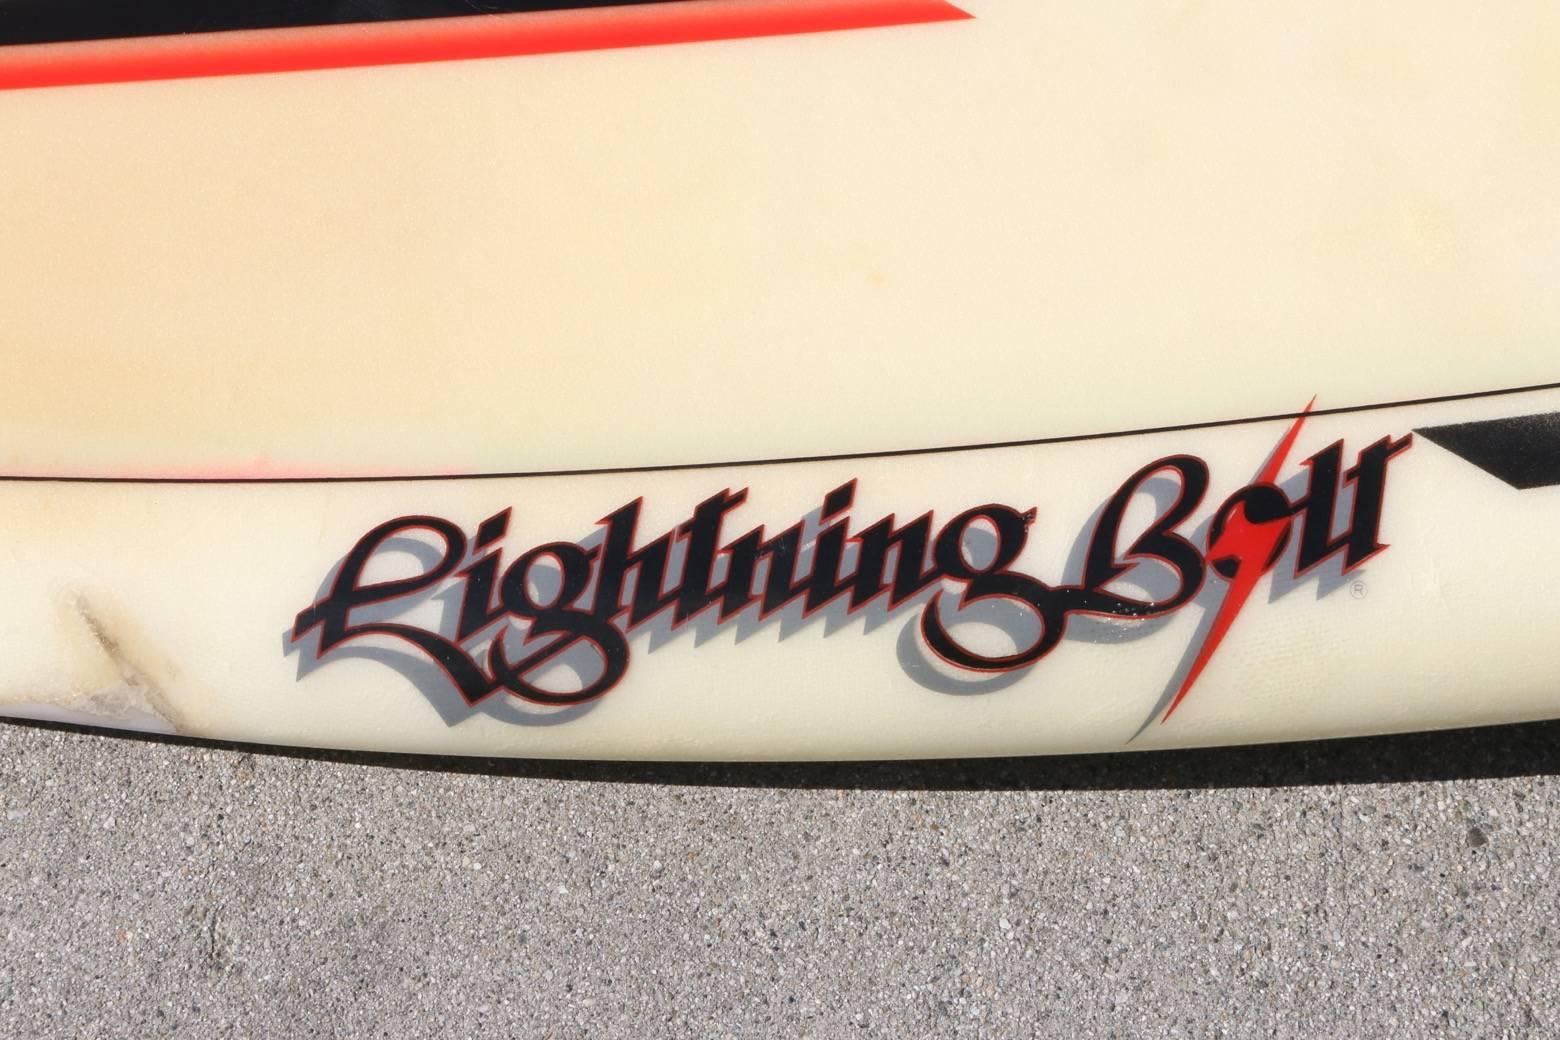 American Lightning Bolt Surfboard with Black and Red Bolt, 1980s